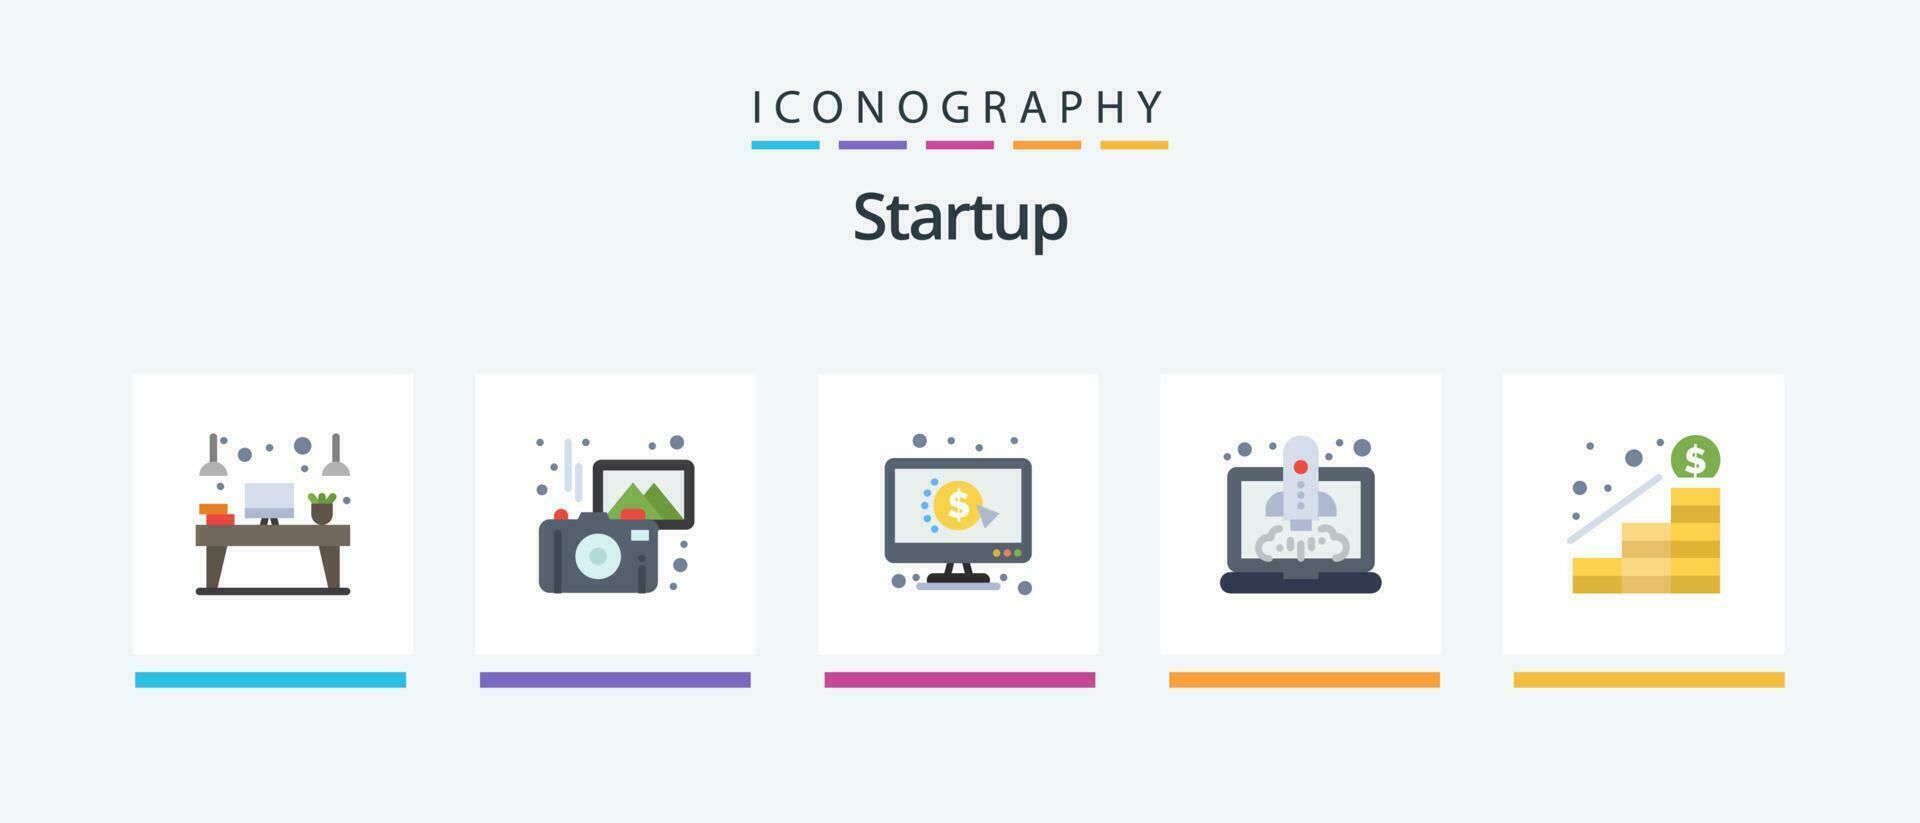 Startup Flat 5 Icon Pack Including growth. speedup. camera. launching. ppc. Creative Icons Design vector